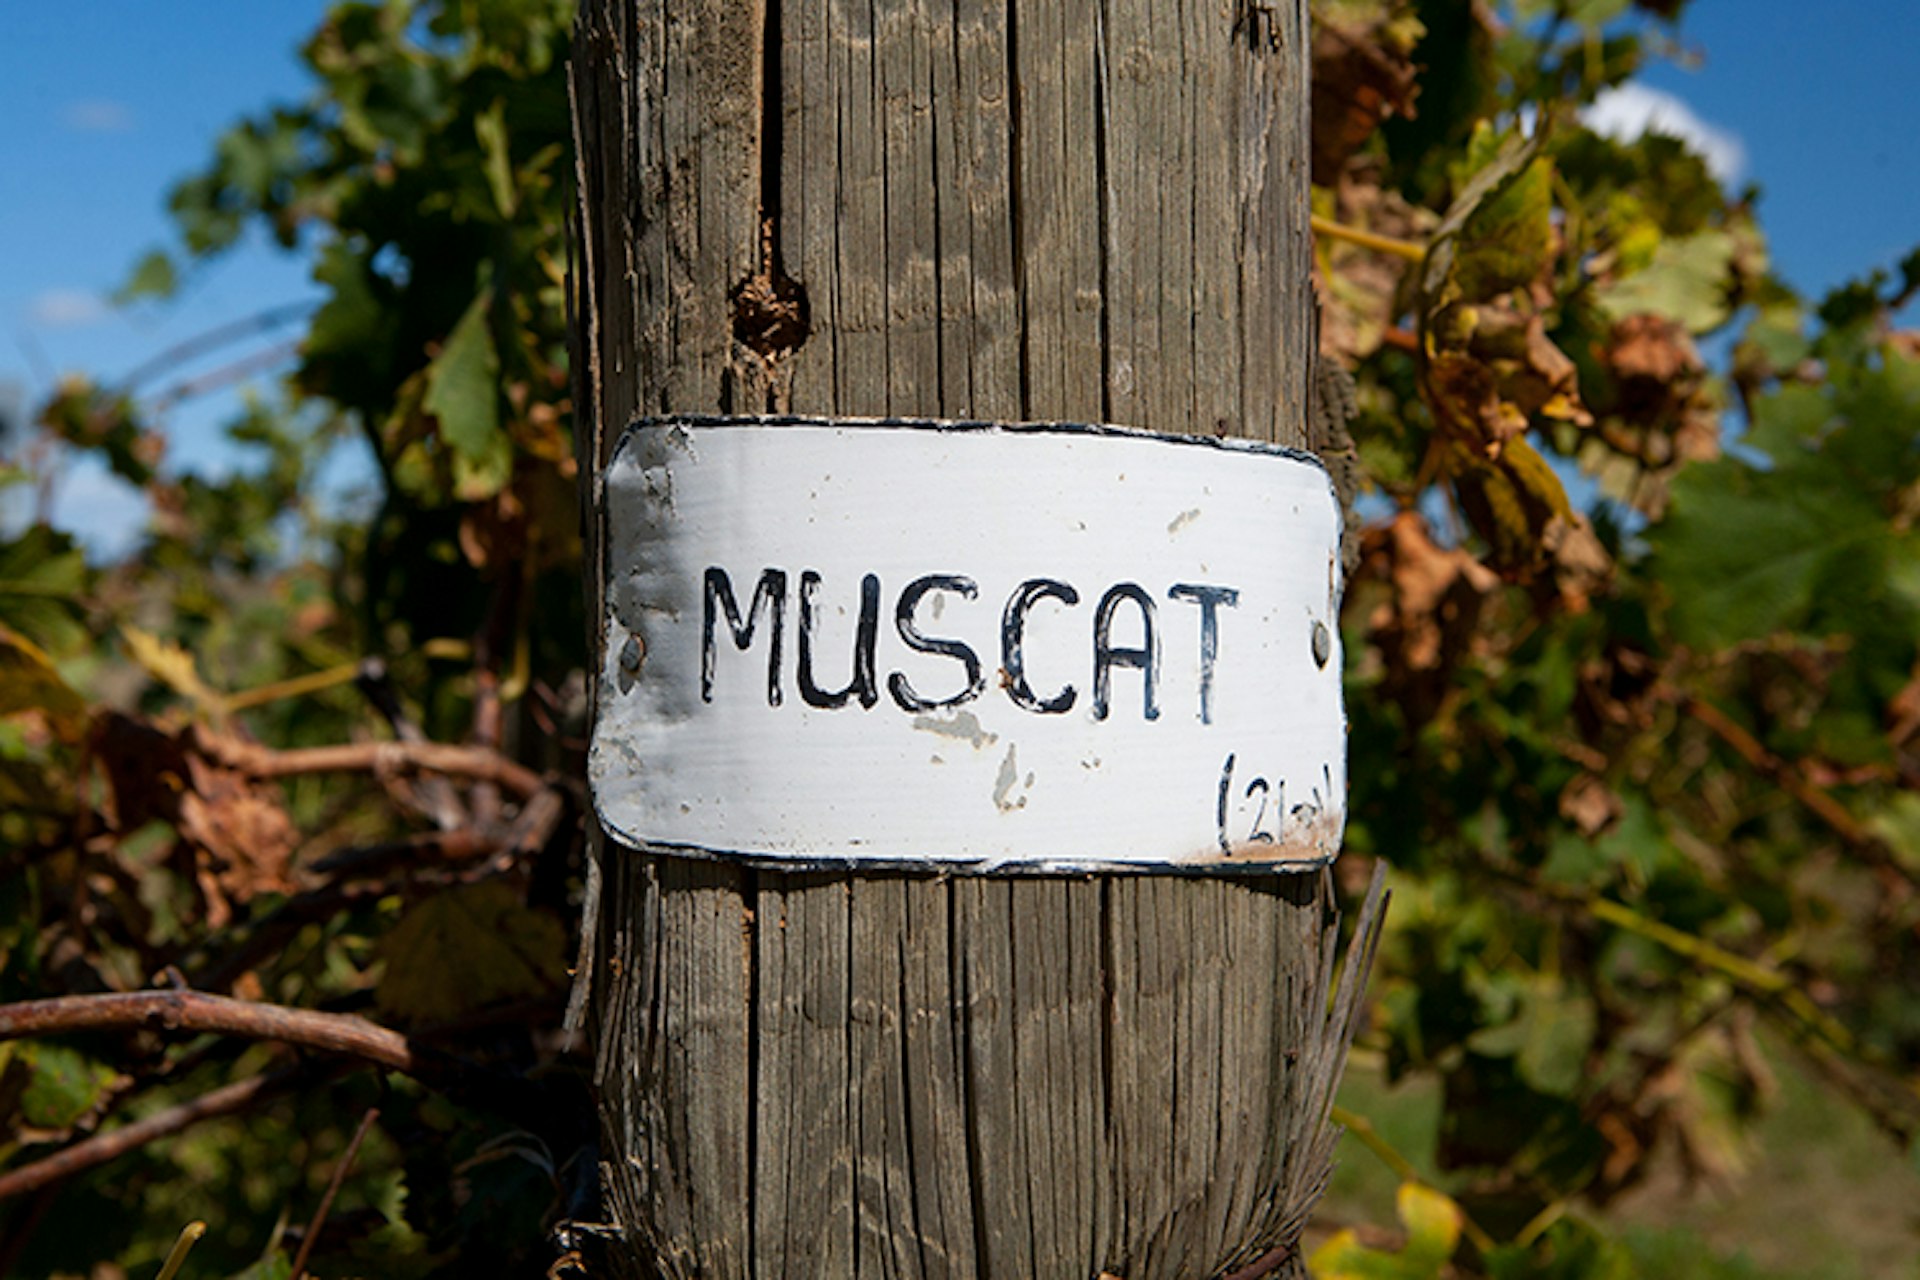 A sign for a Muscat winery in Rutherglen, Victoria, Australia